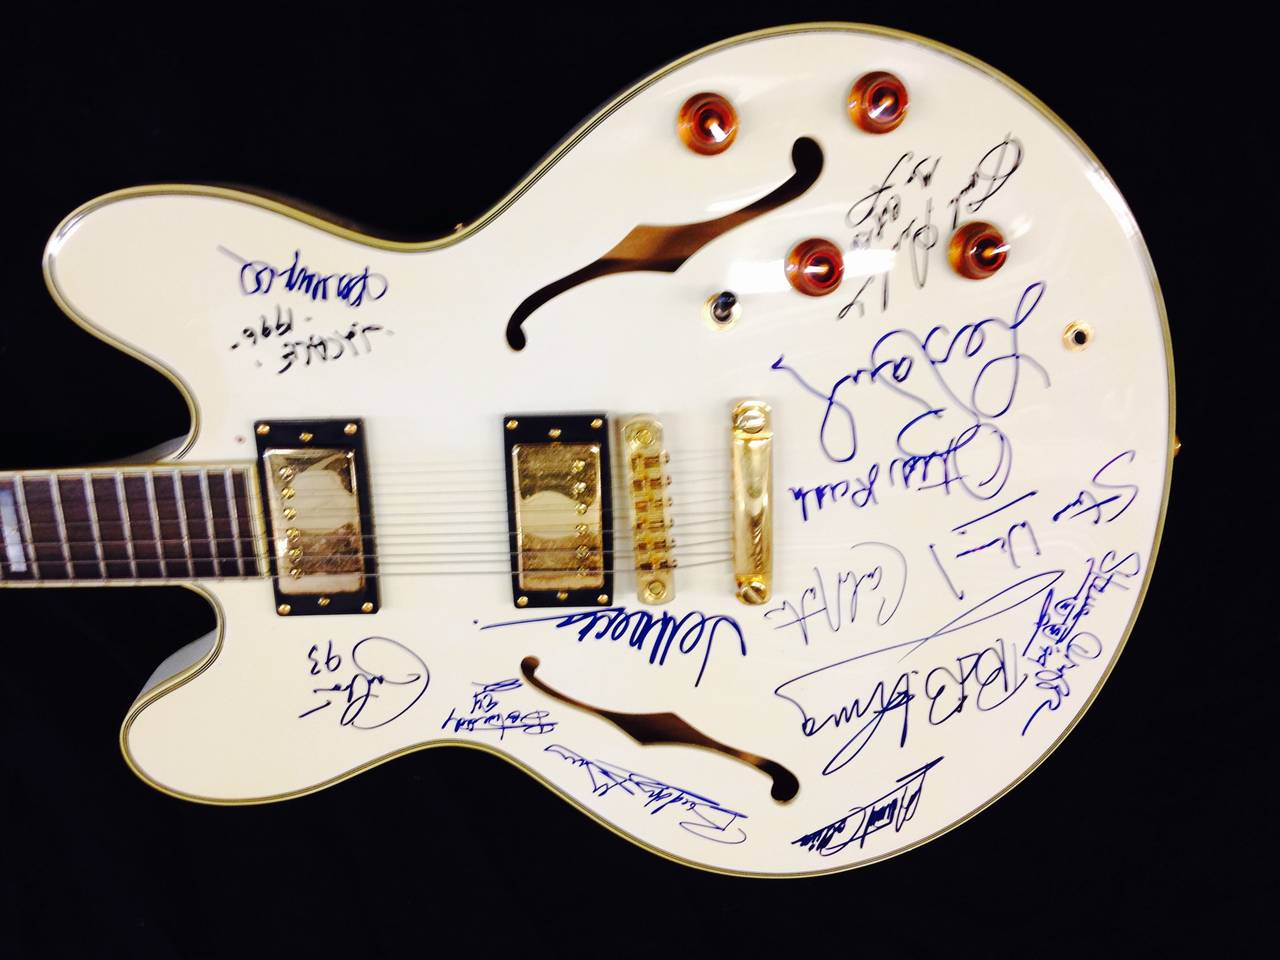 American Ephiphone Sheraton Guitar Autographed by Music Legends For Sale